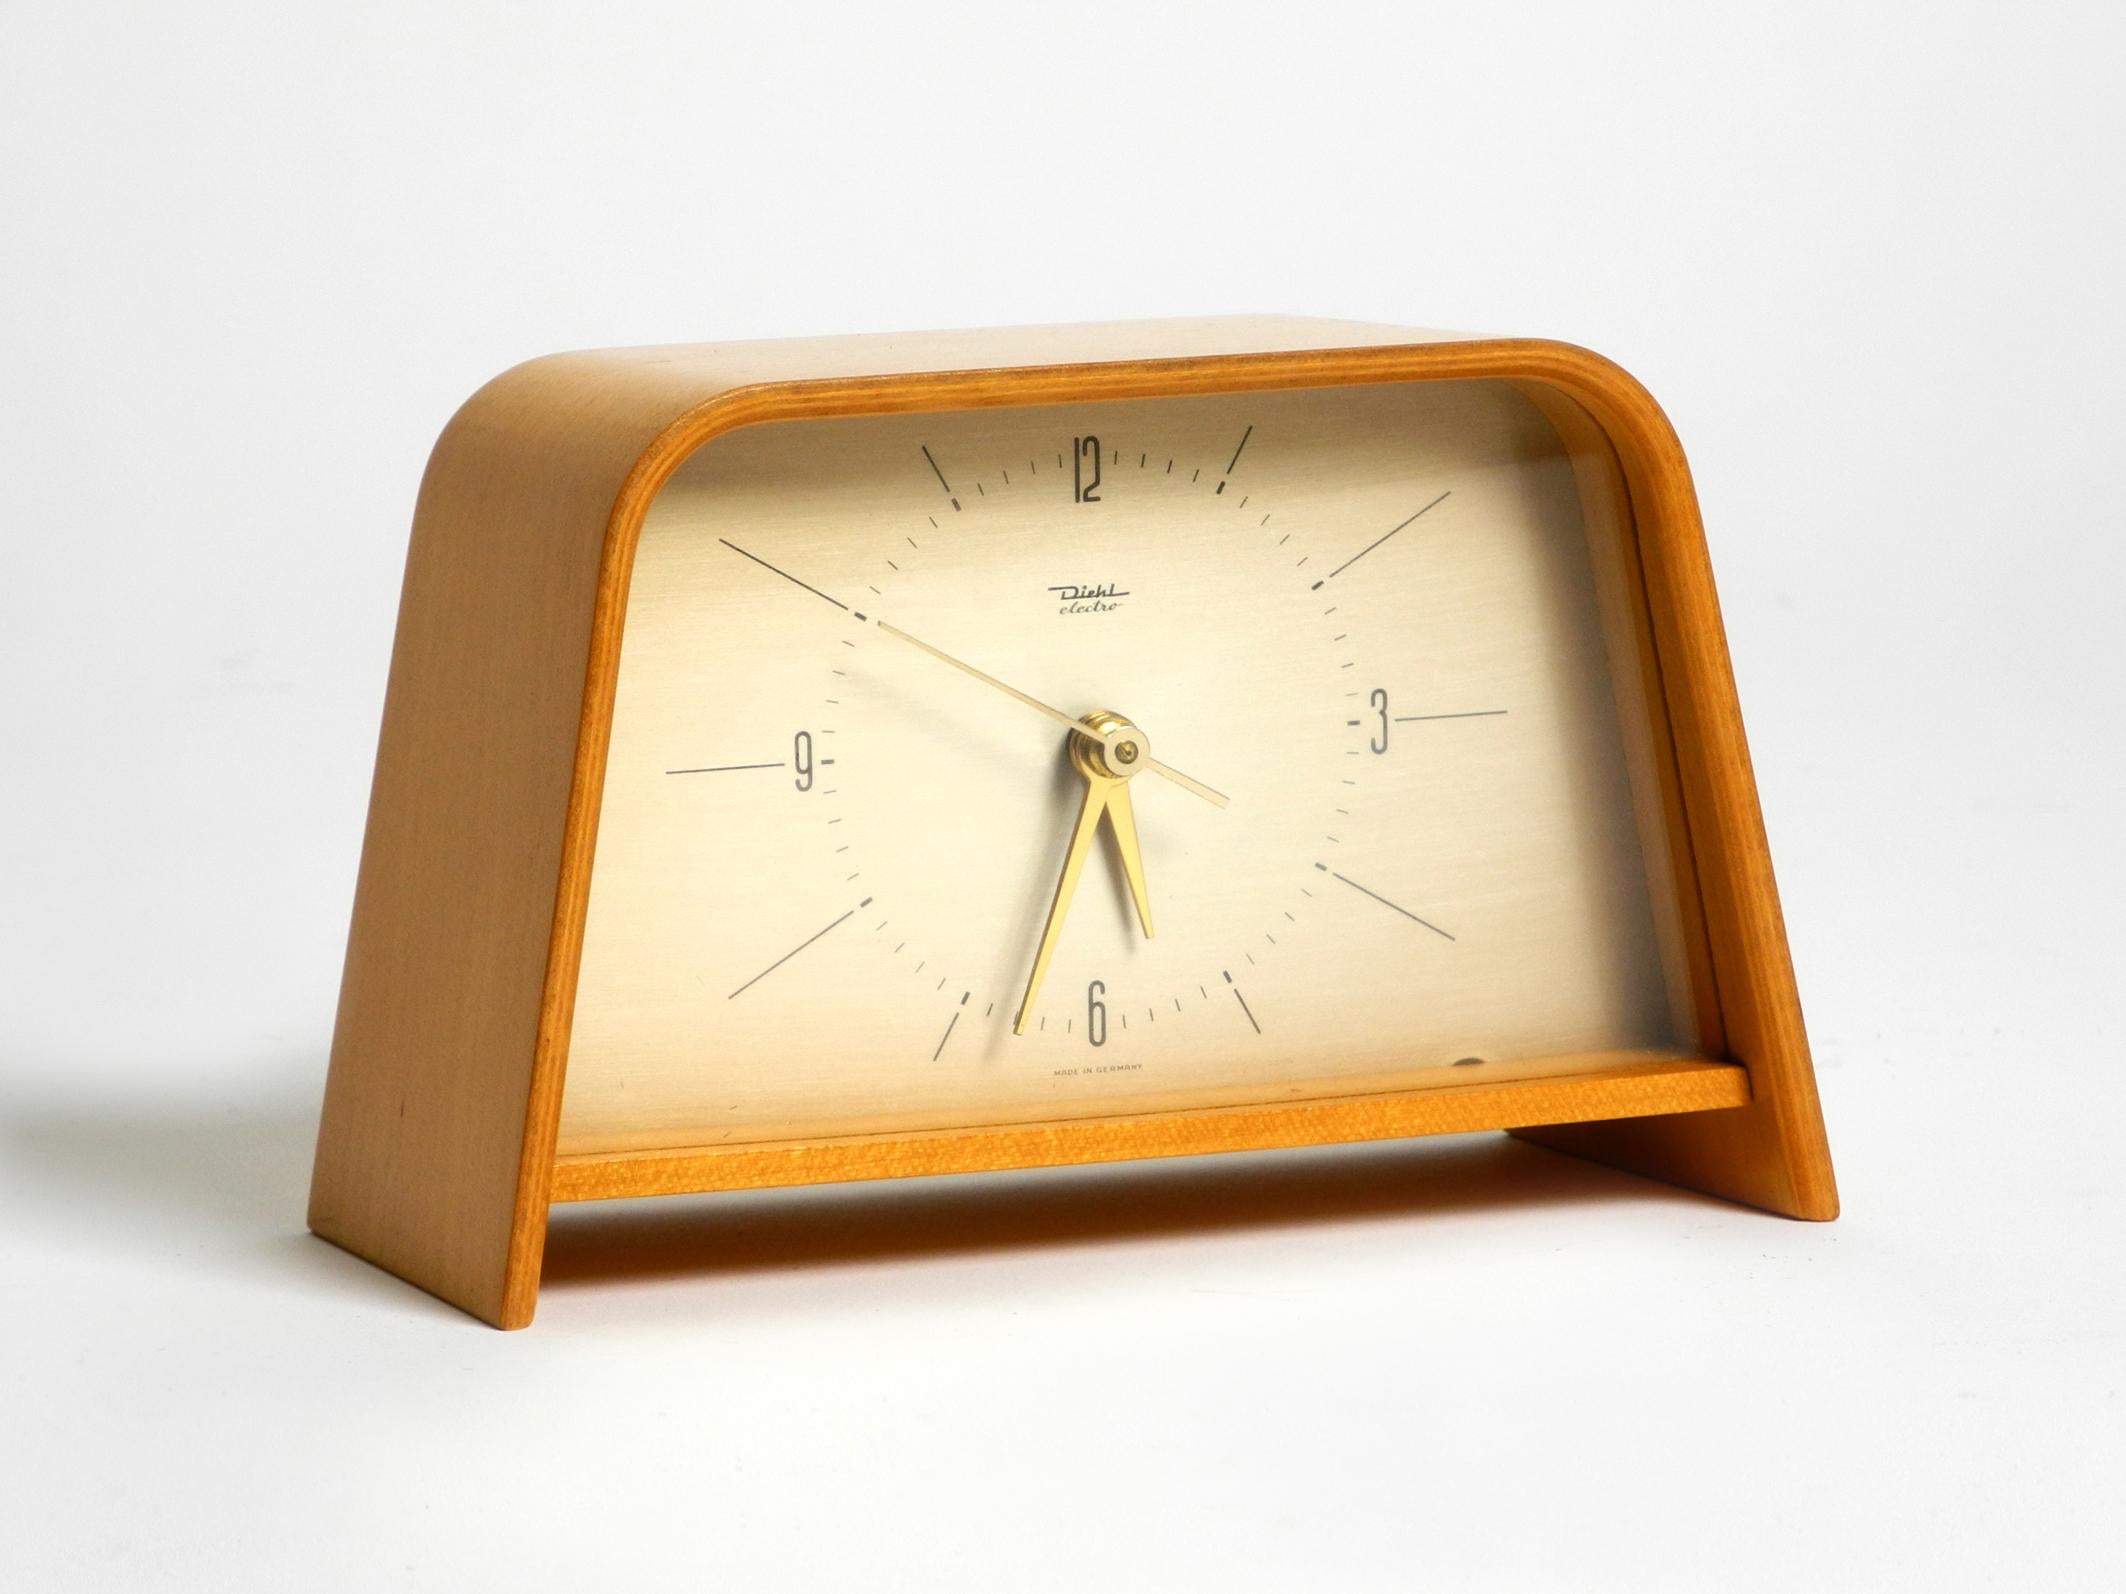 Beautiful original 1950s Diehl Electro table clock with curved teak plywood 8